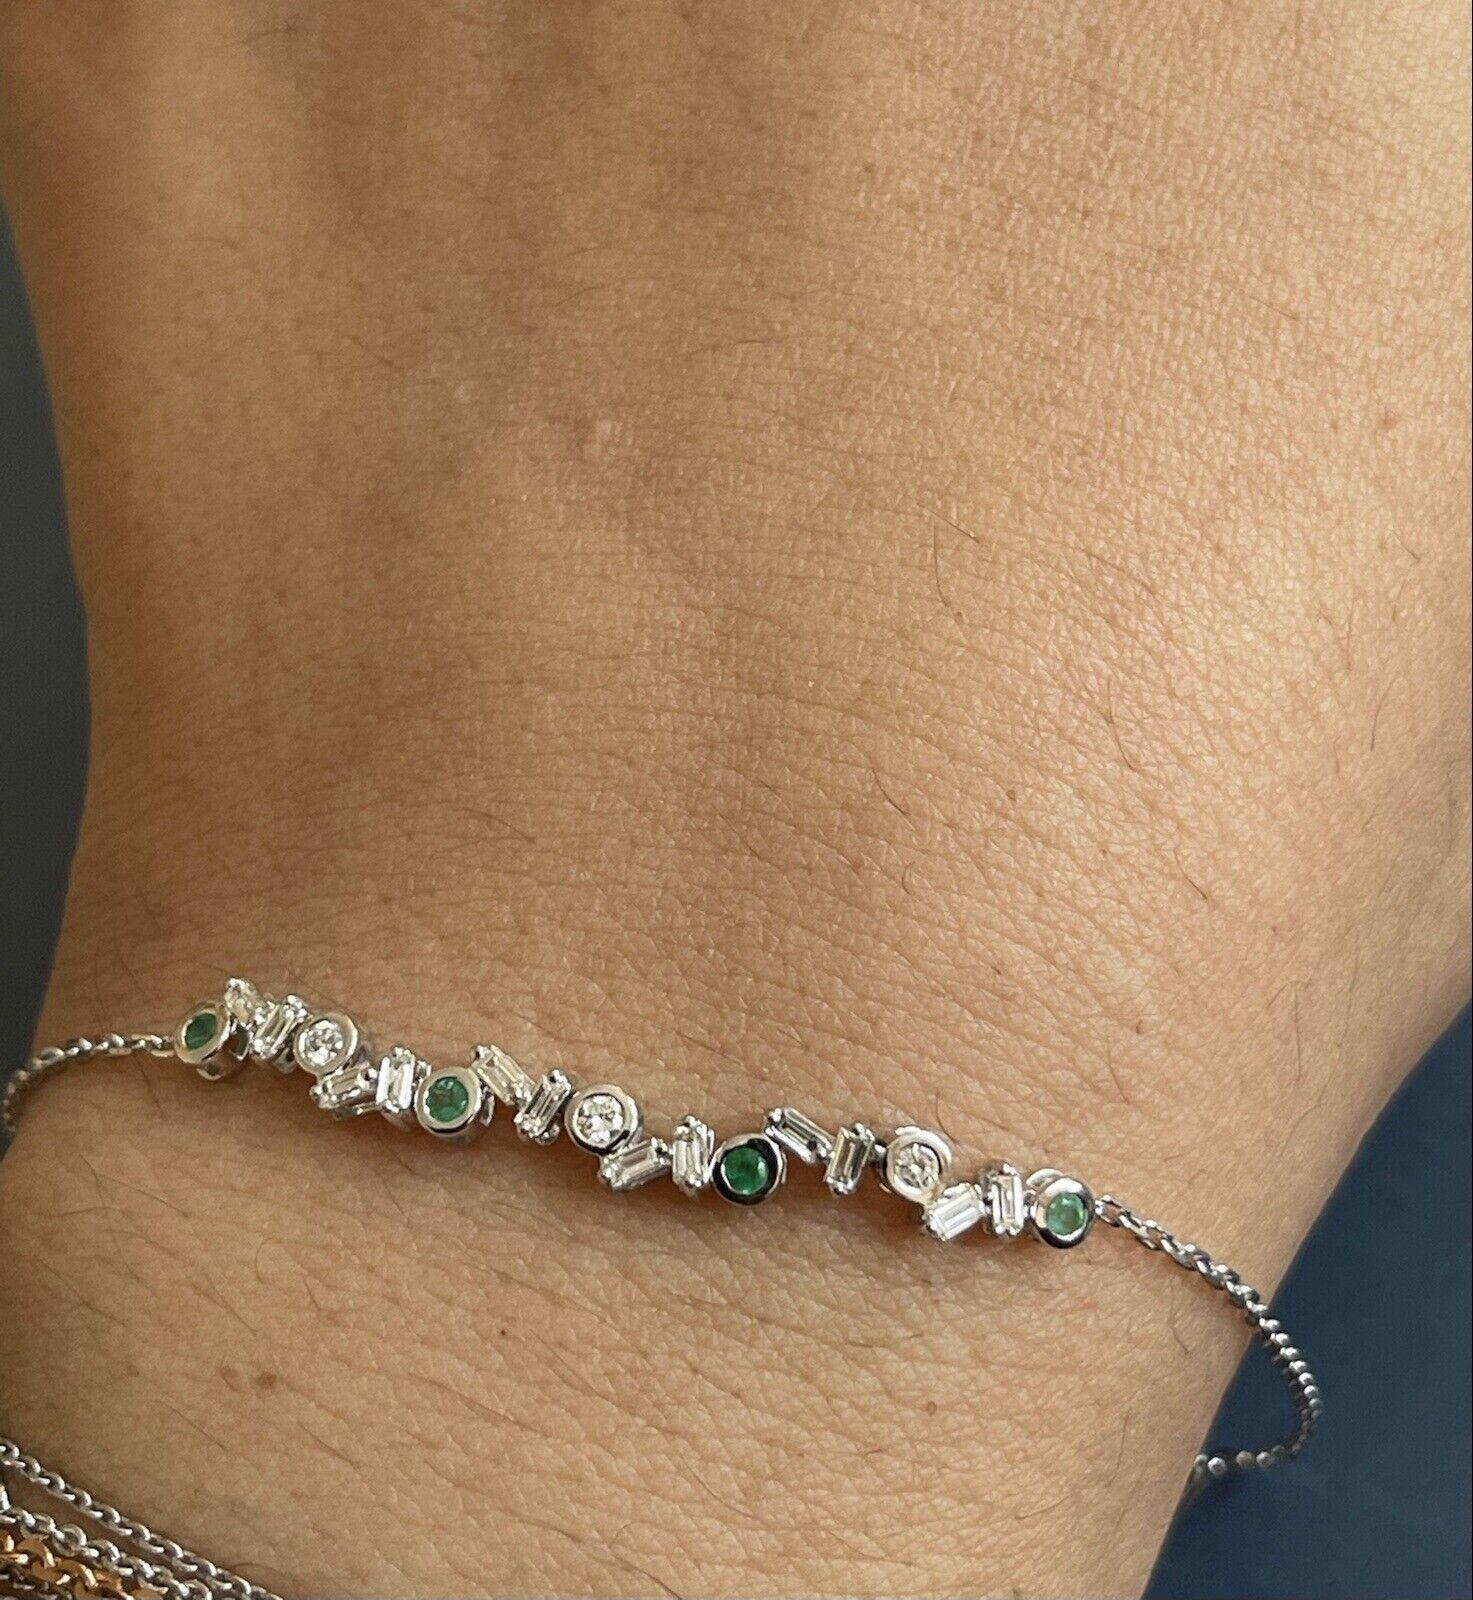 

Fine high jewellery meets classic

Gorgeous bracelet set with 0.50ct+ diamonds and 0.25ct+ emeralds

Hallmarked 750

Please study pics for weight

SI1/VS clarity

G colour

Natural emerald shade can vary a bit in stones, that’s the characteristic